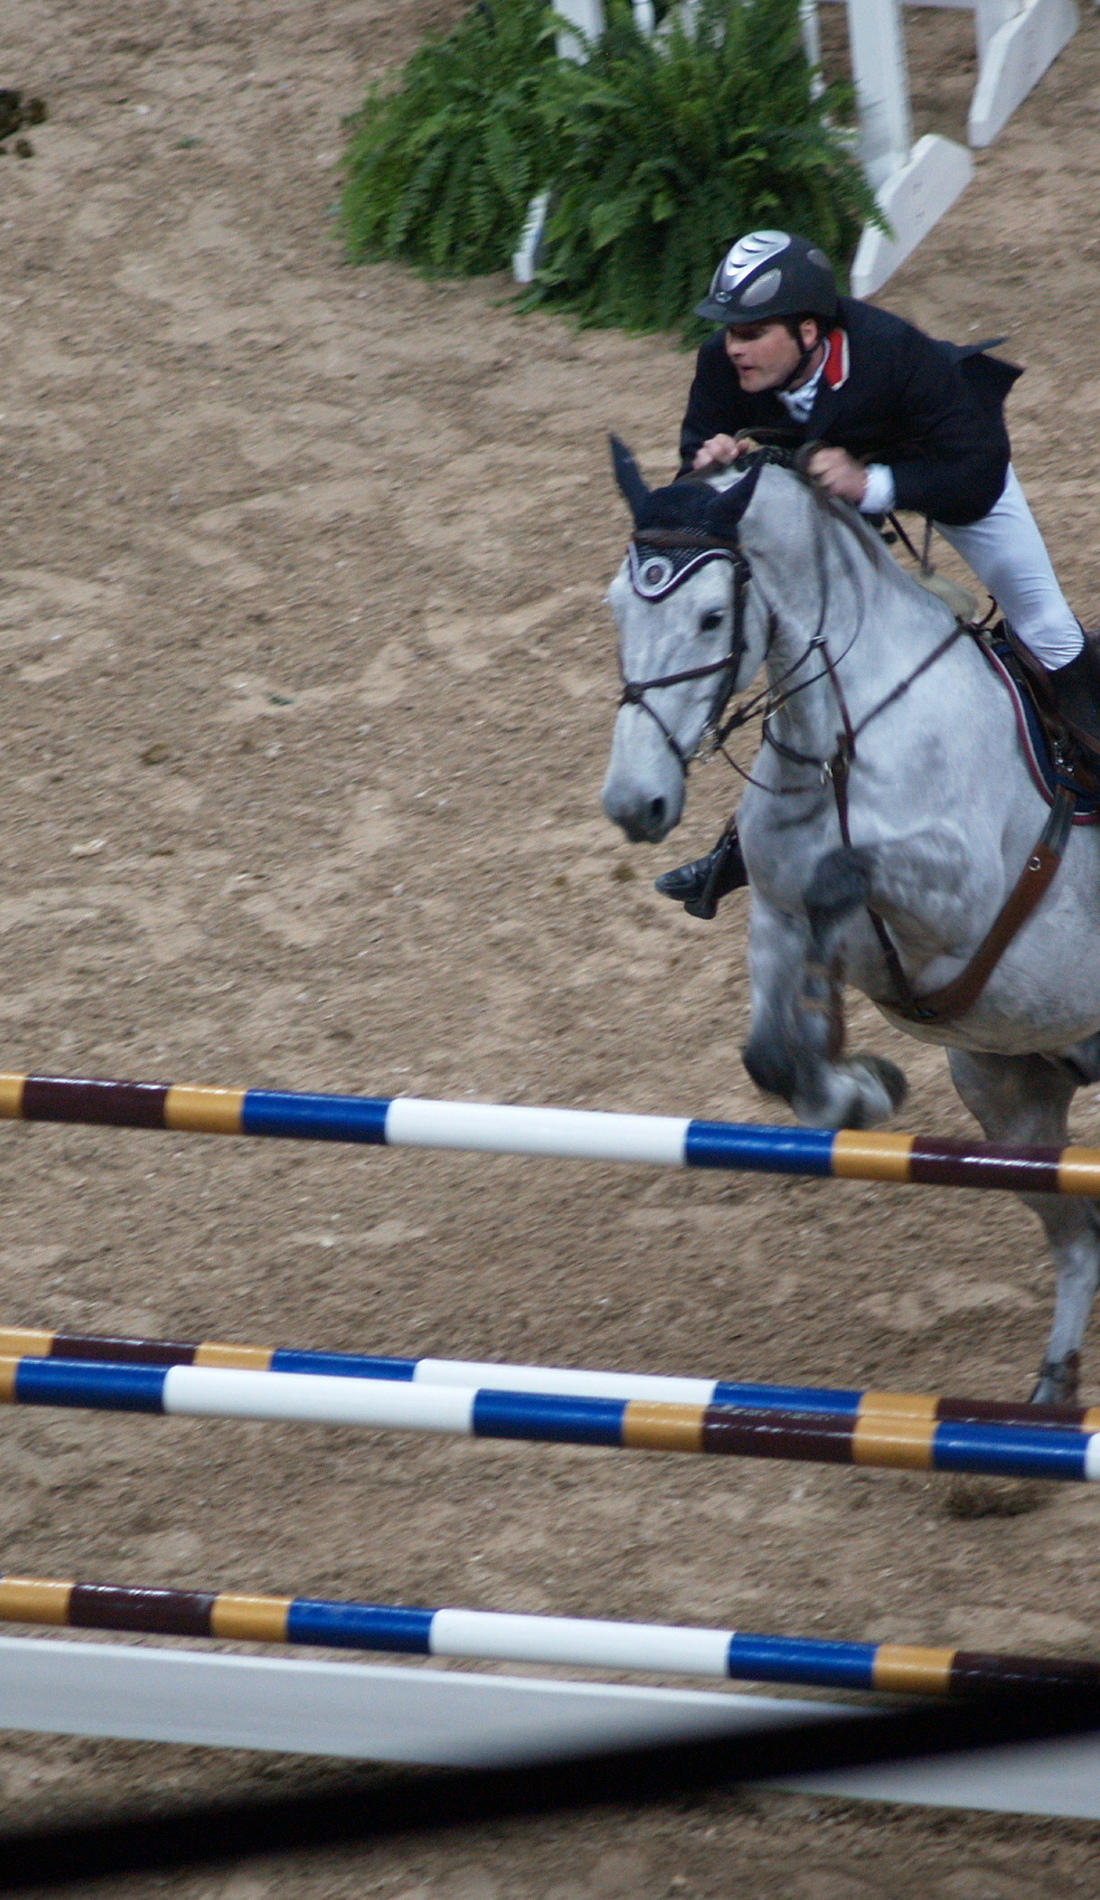 A FEI World Cup Finals live event